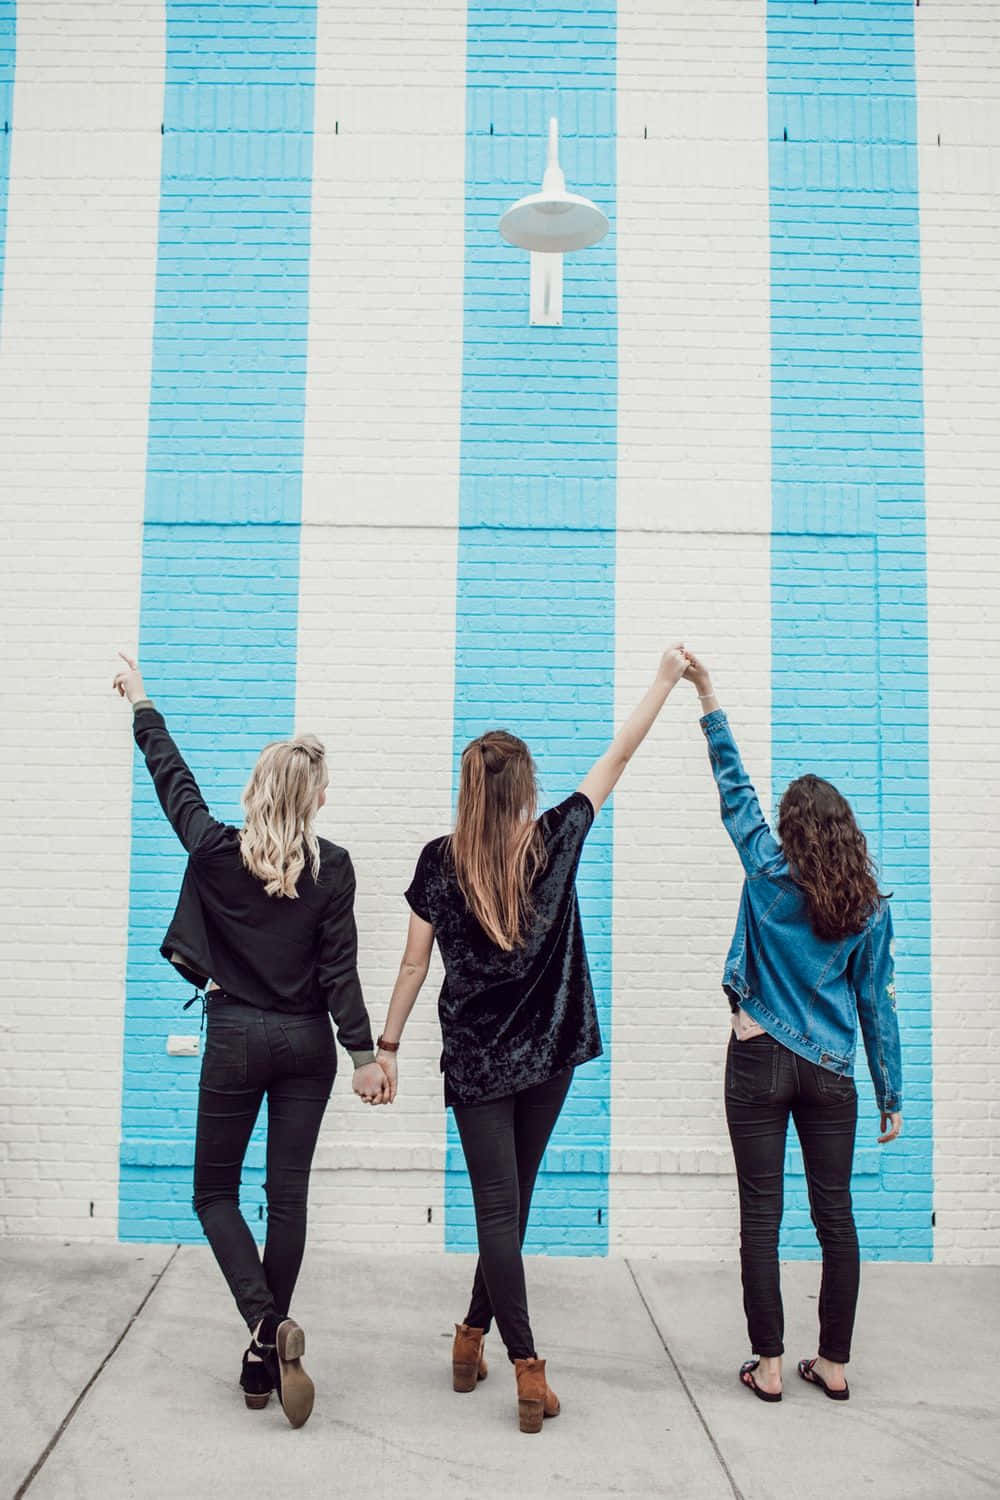 Friendship Women Holding Hands Blue And White Picture